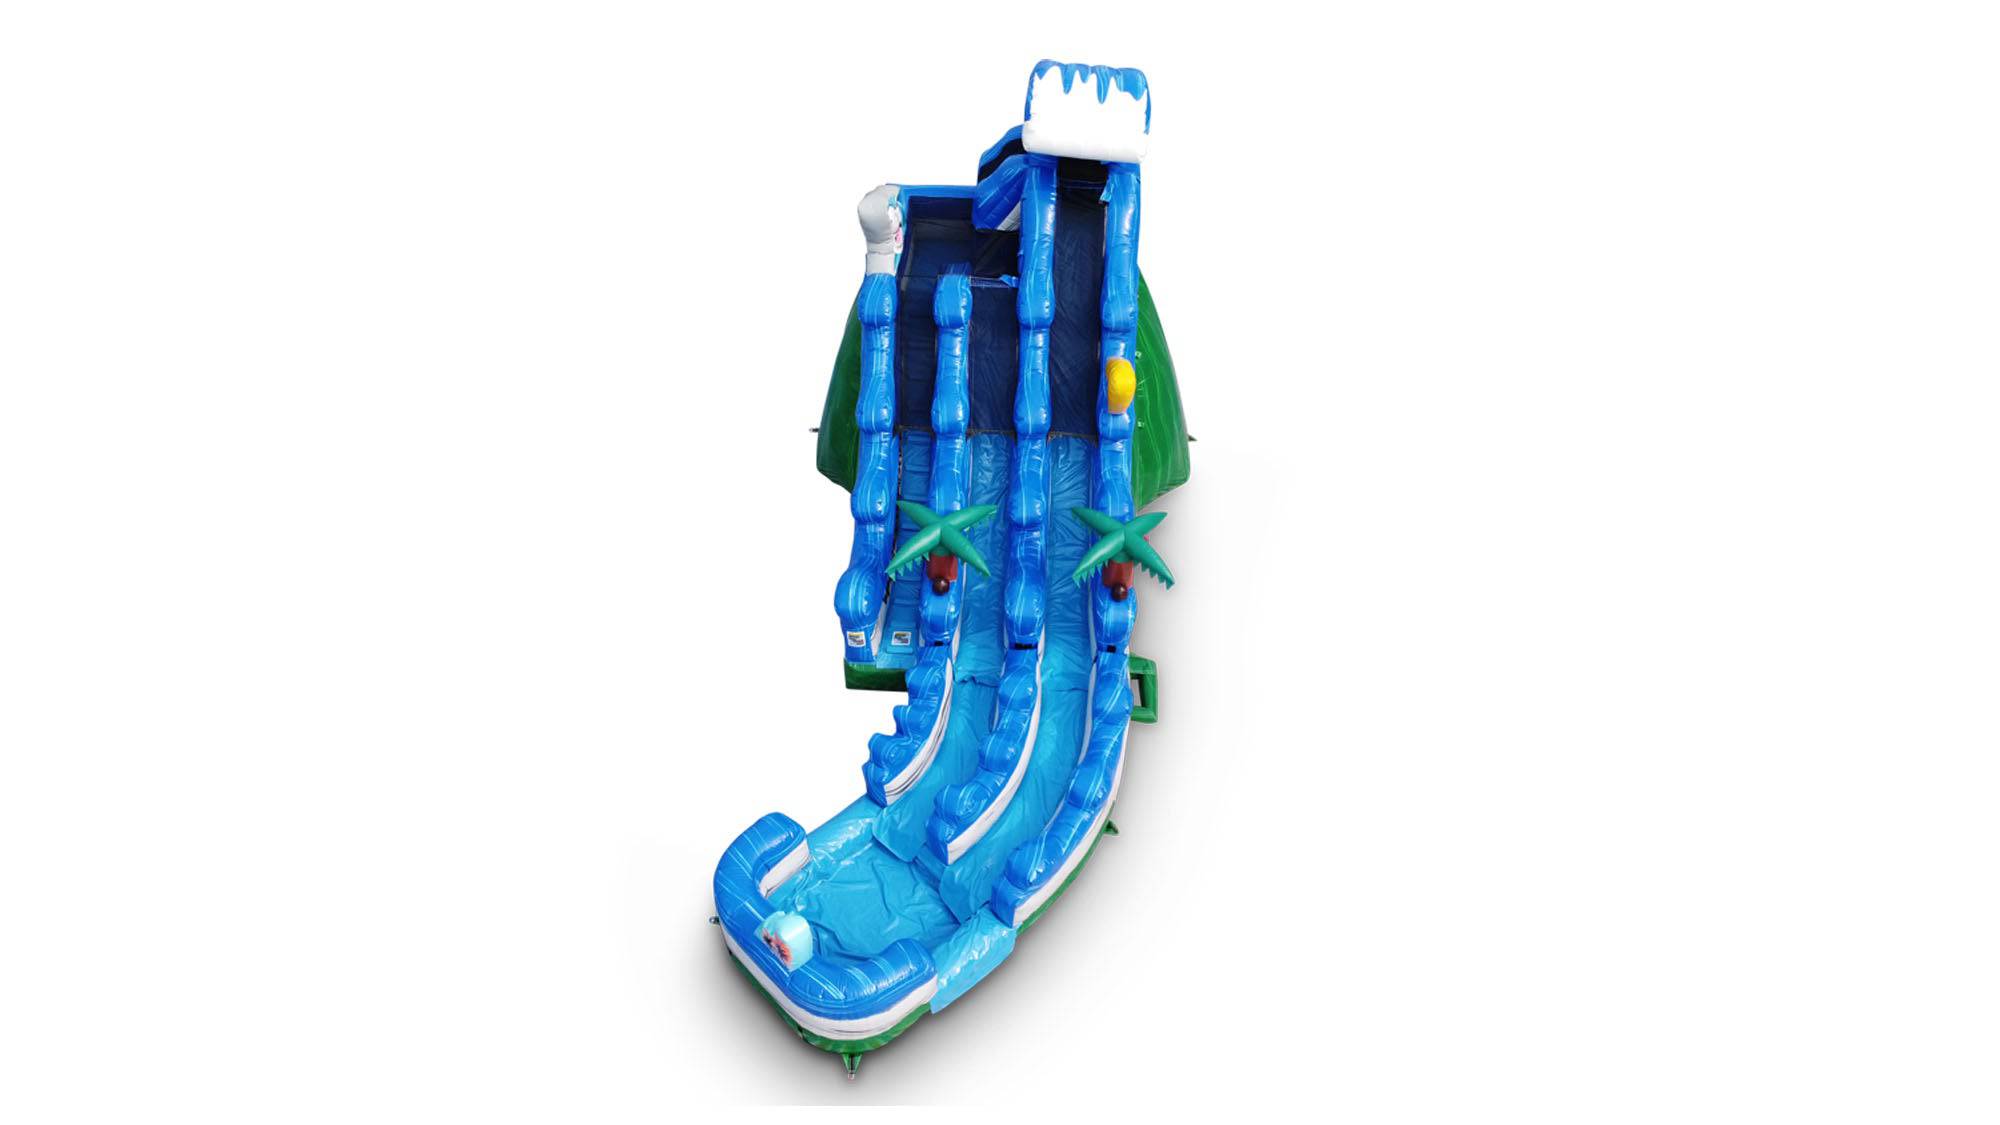 20 Tropical Curve Inflatable Dual Slide Wet/Dry - HullaBalloo Sales